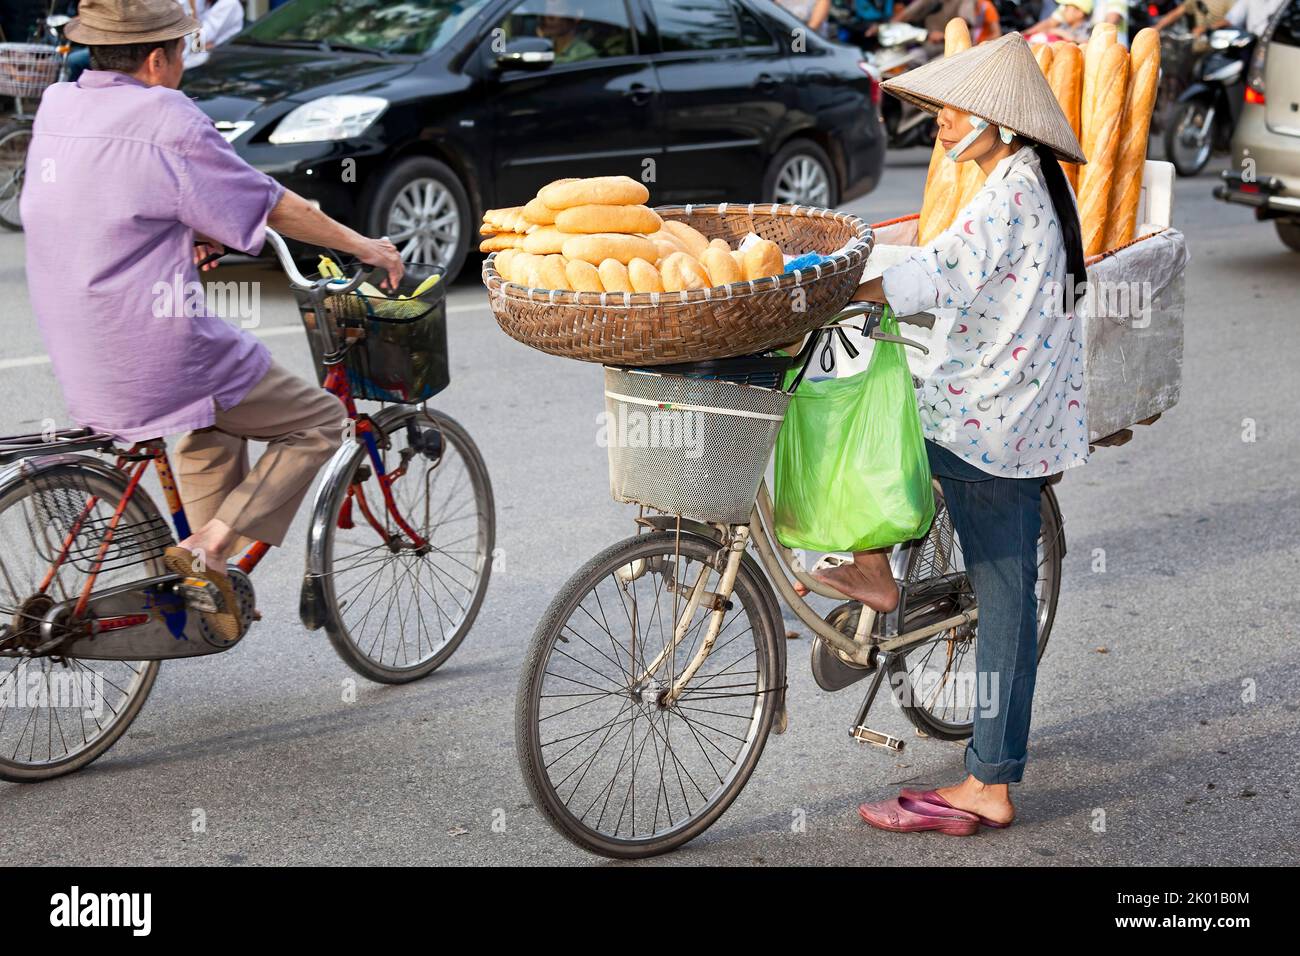 Vietnamese lady wearing bamboo hat selling French bread in the street, Hai Phong, Vietnam Stock Photo